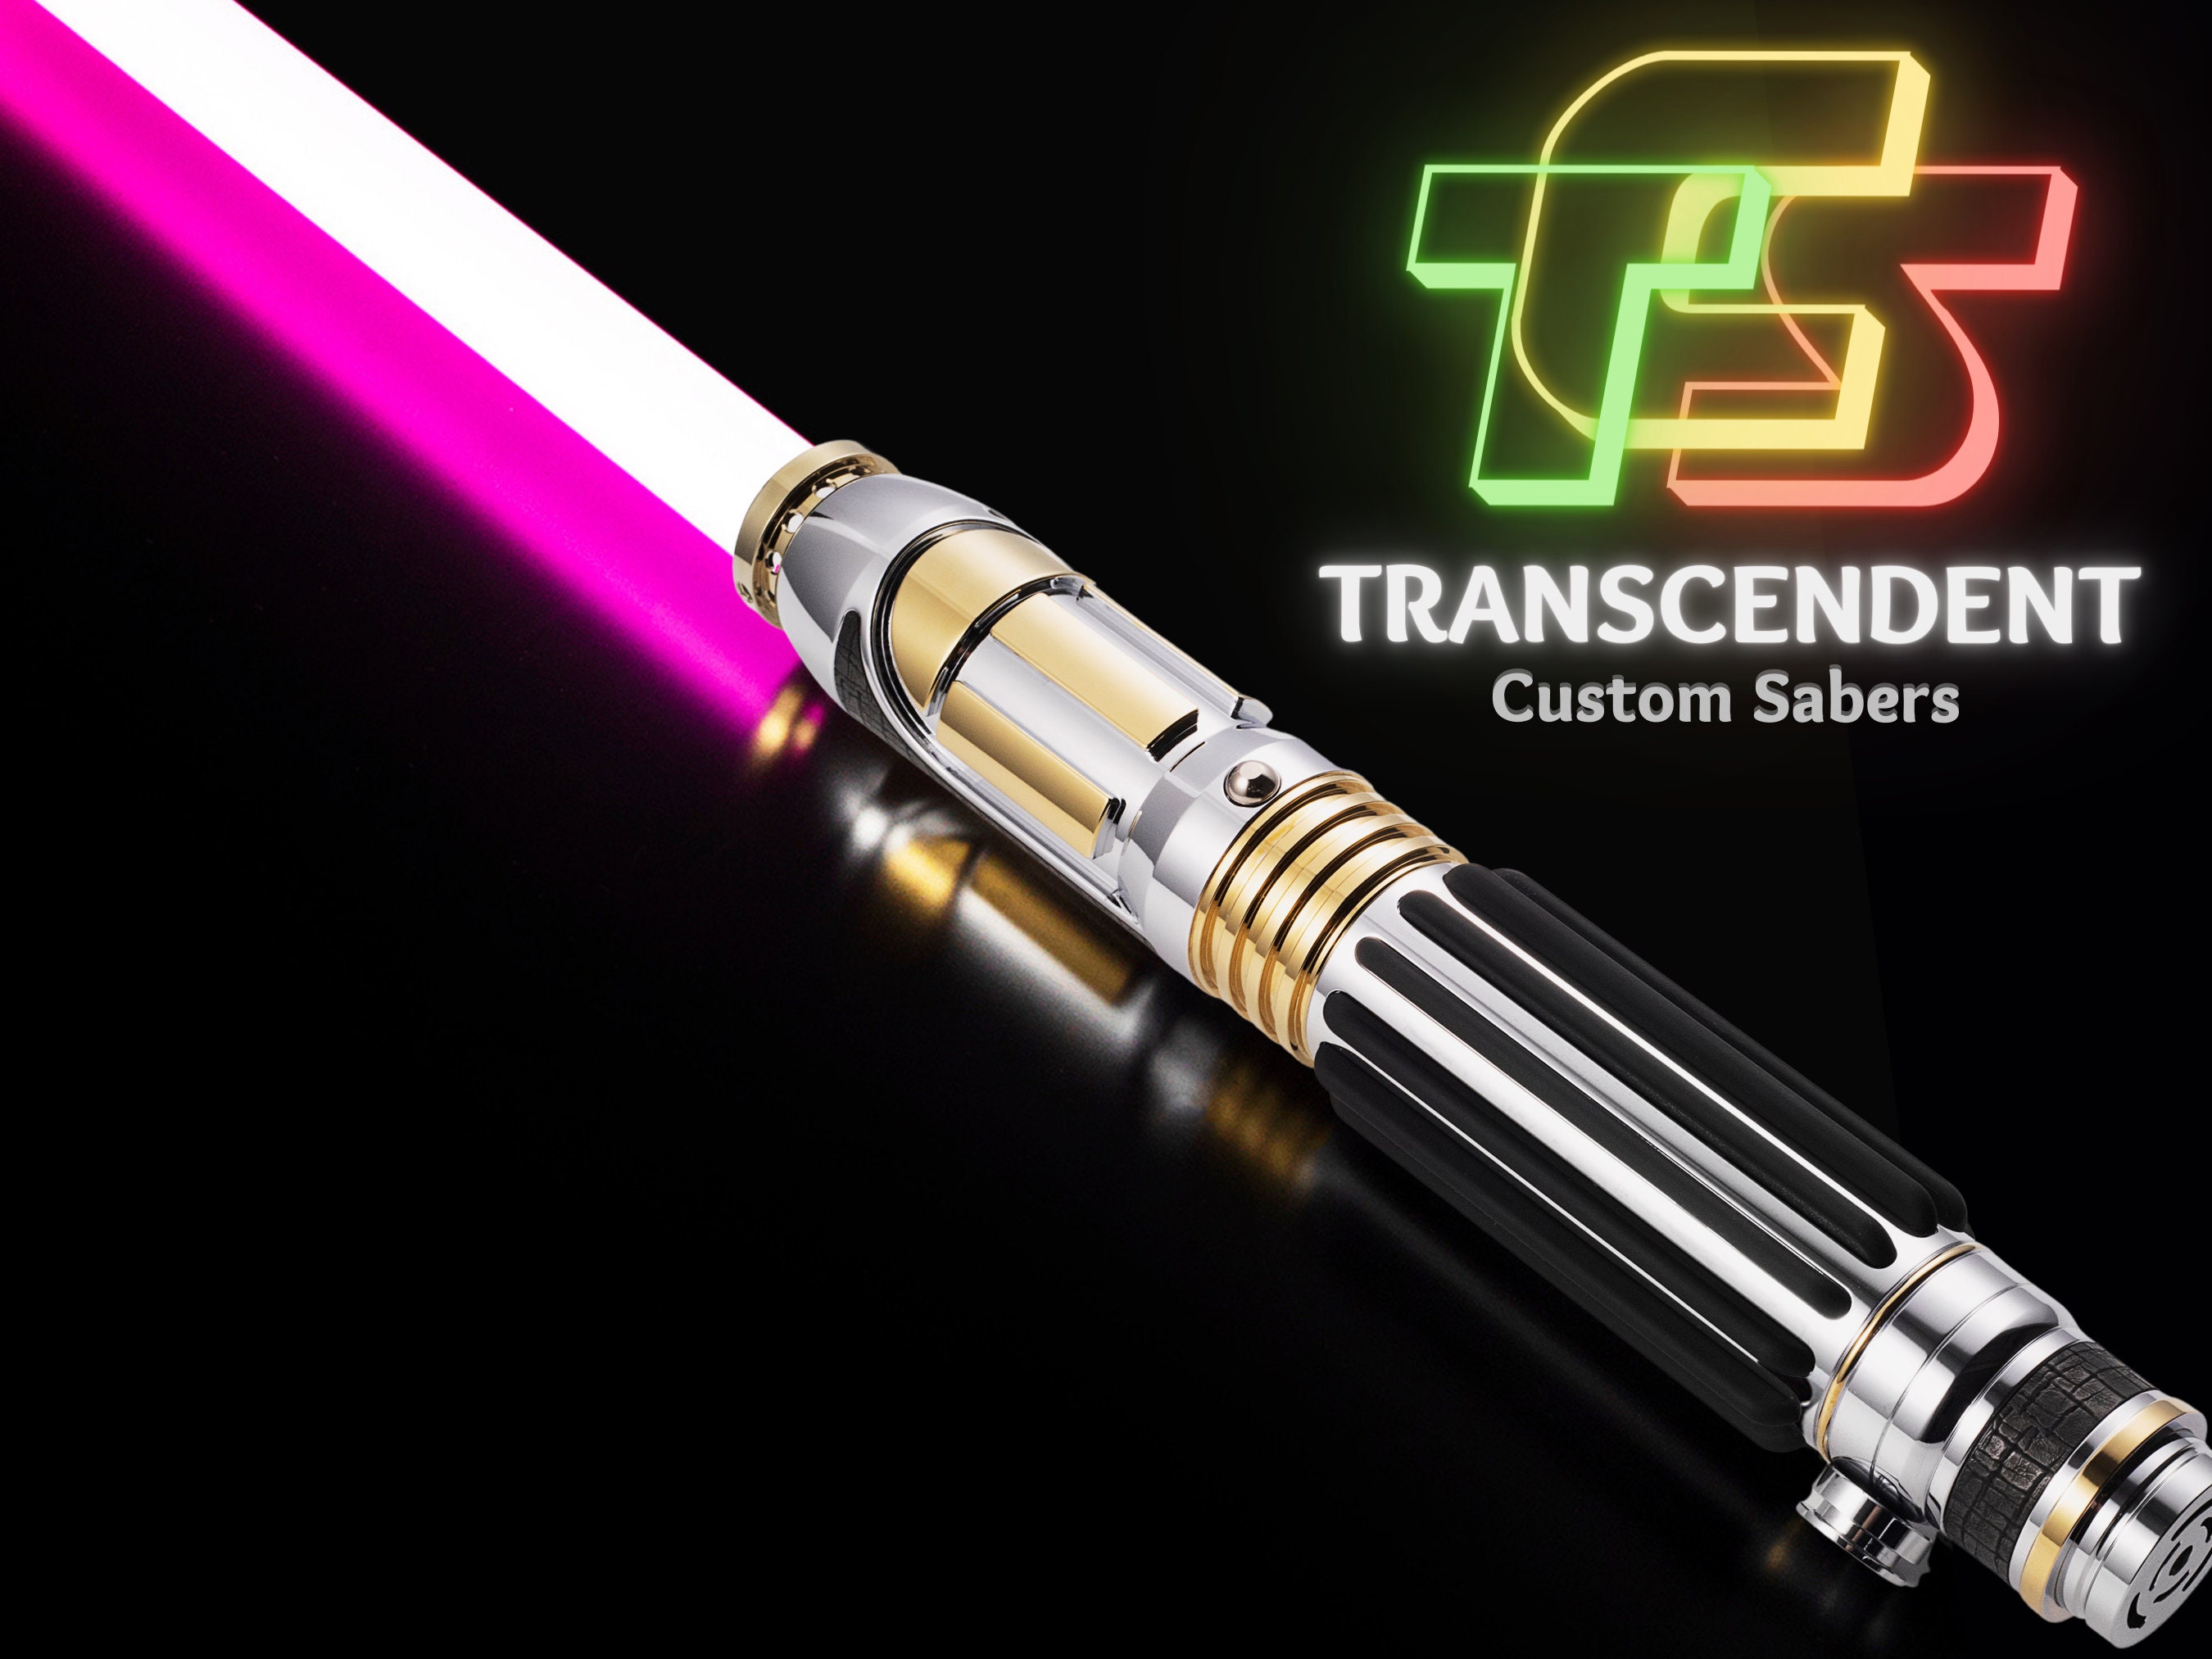 One lightsaber, three accessories, and three trilogies. : r/roblox